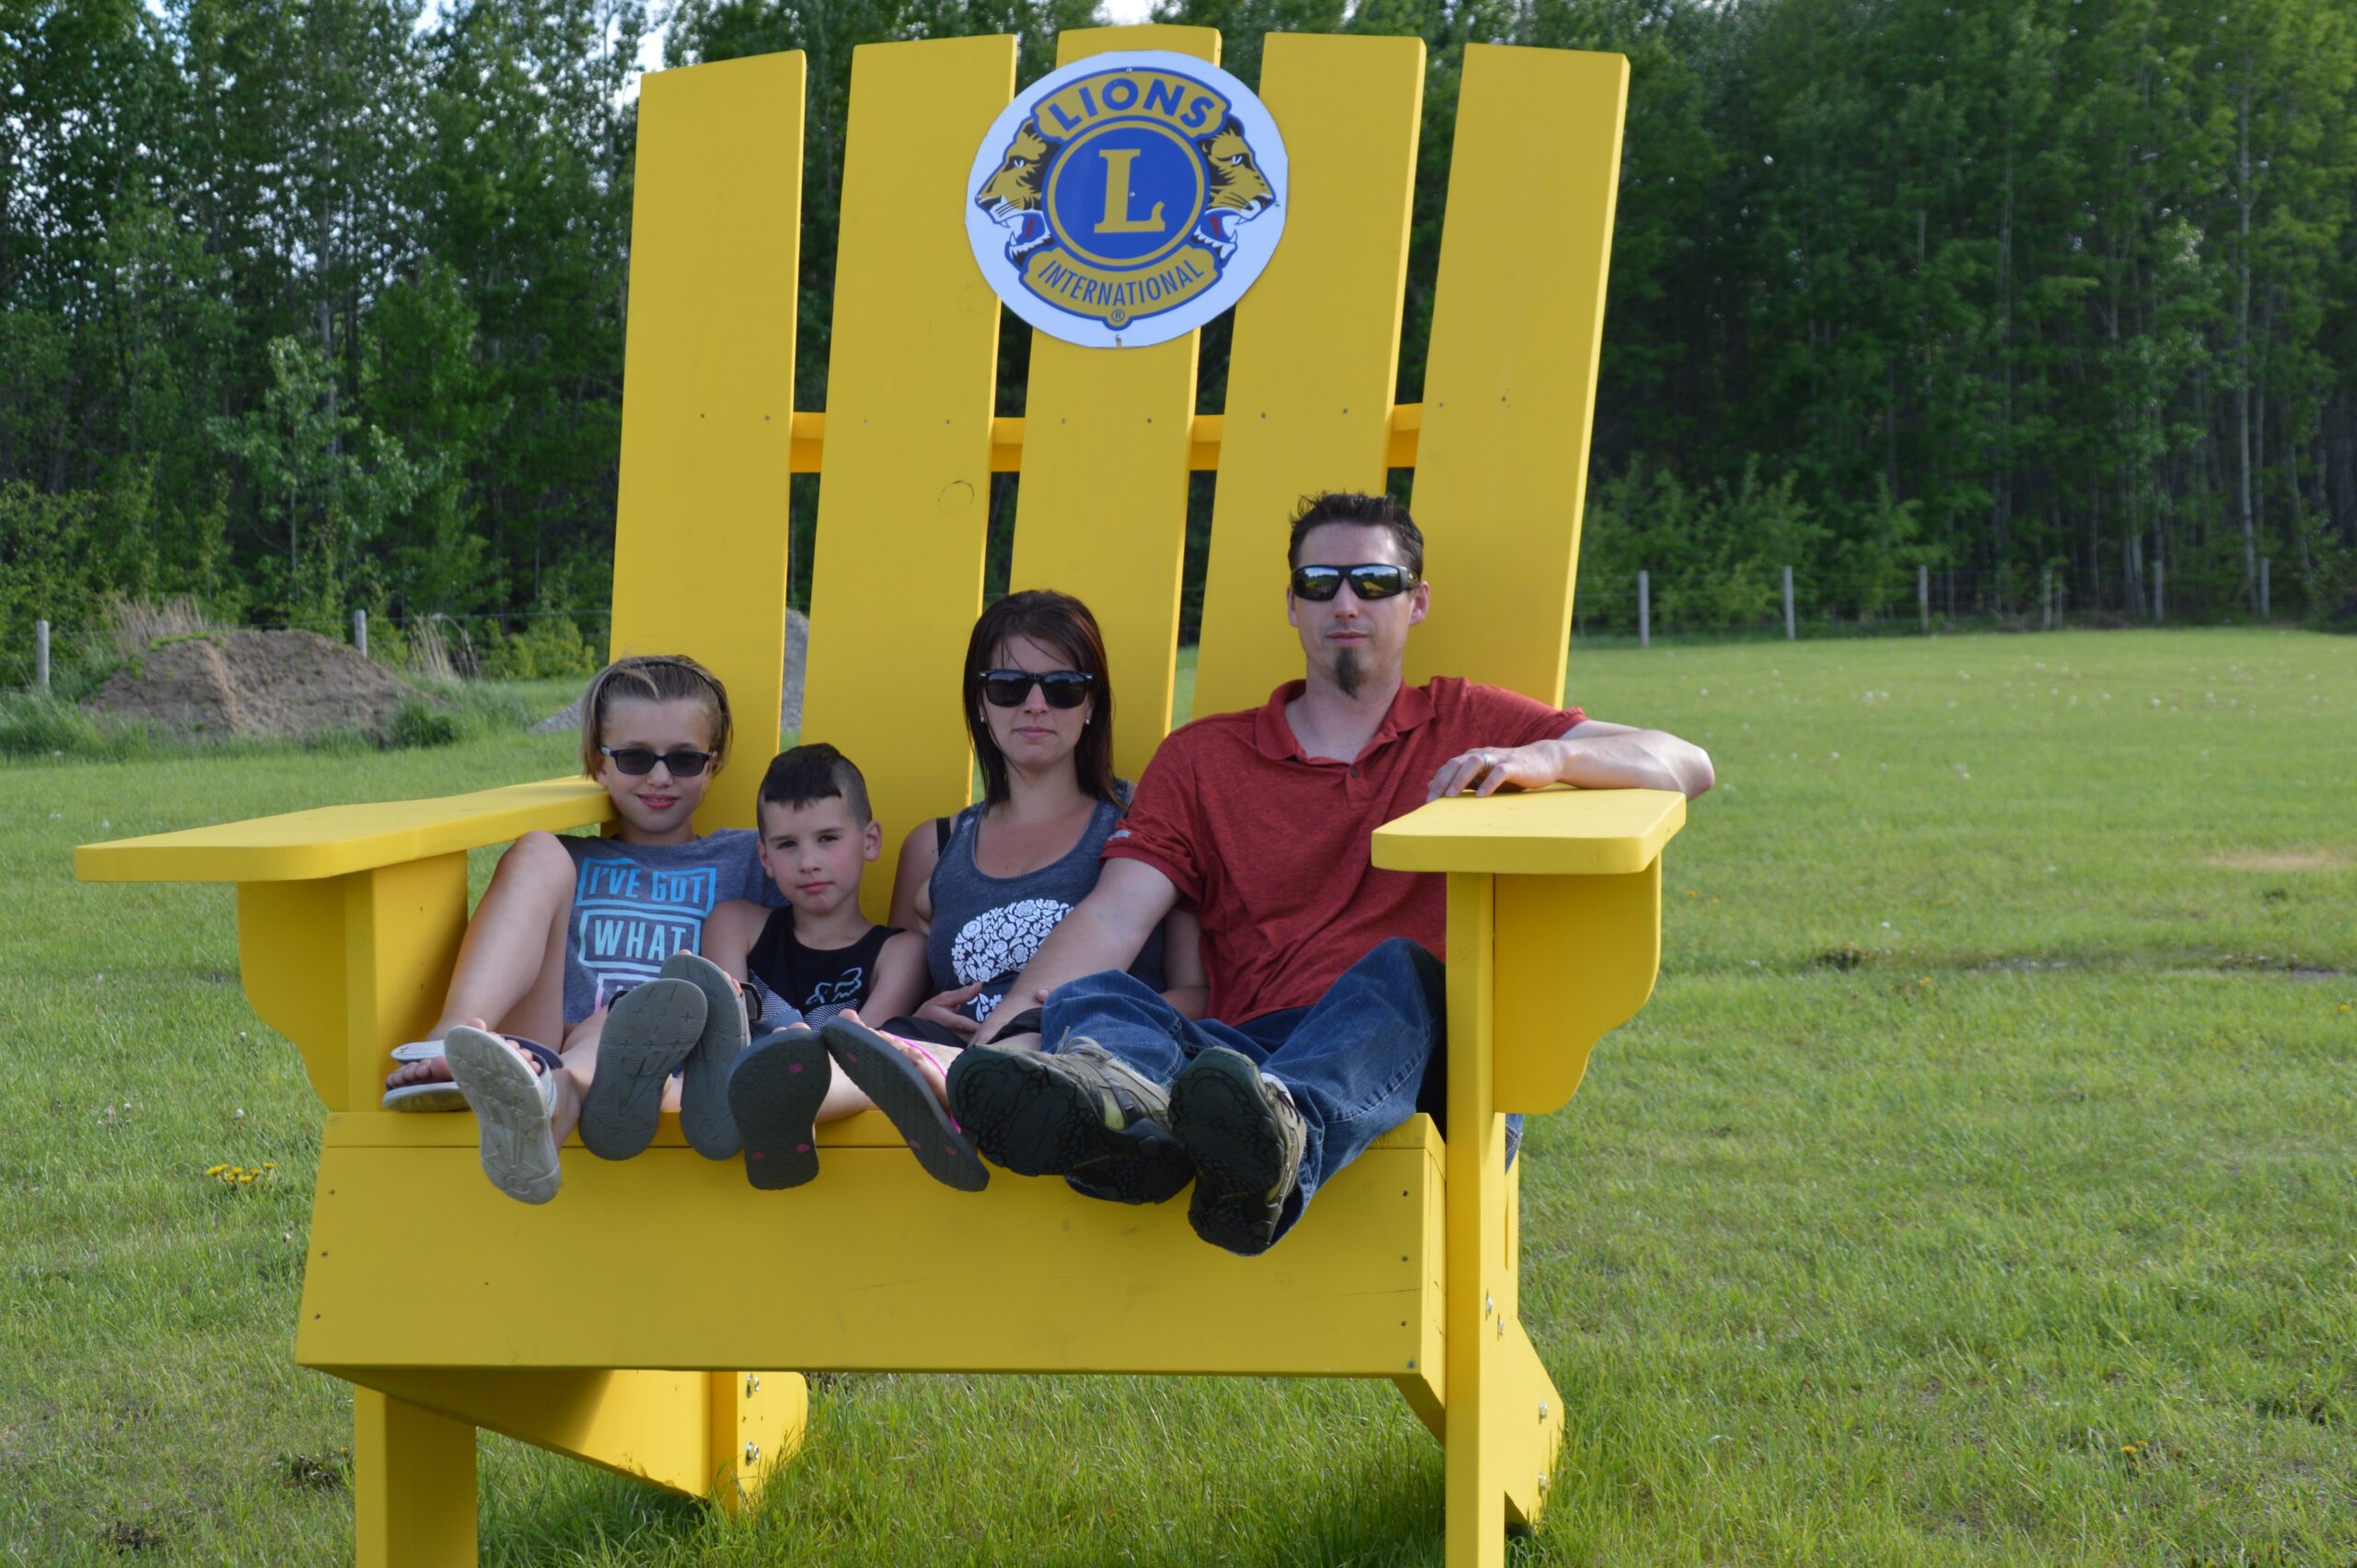 The Chair at the Millet & District Lions Club